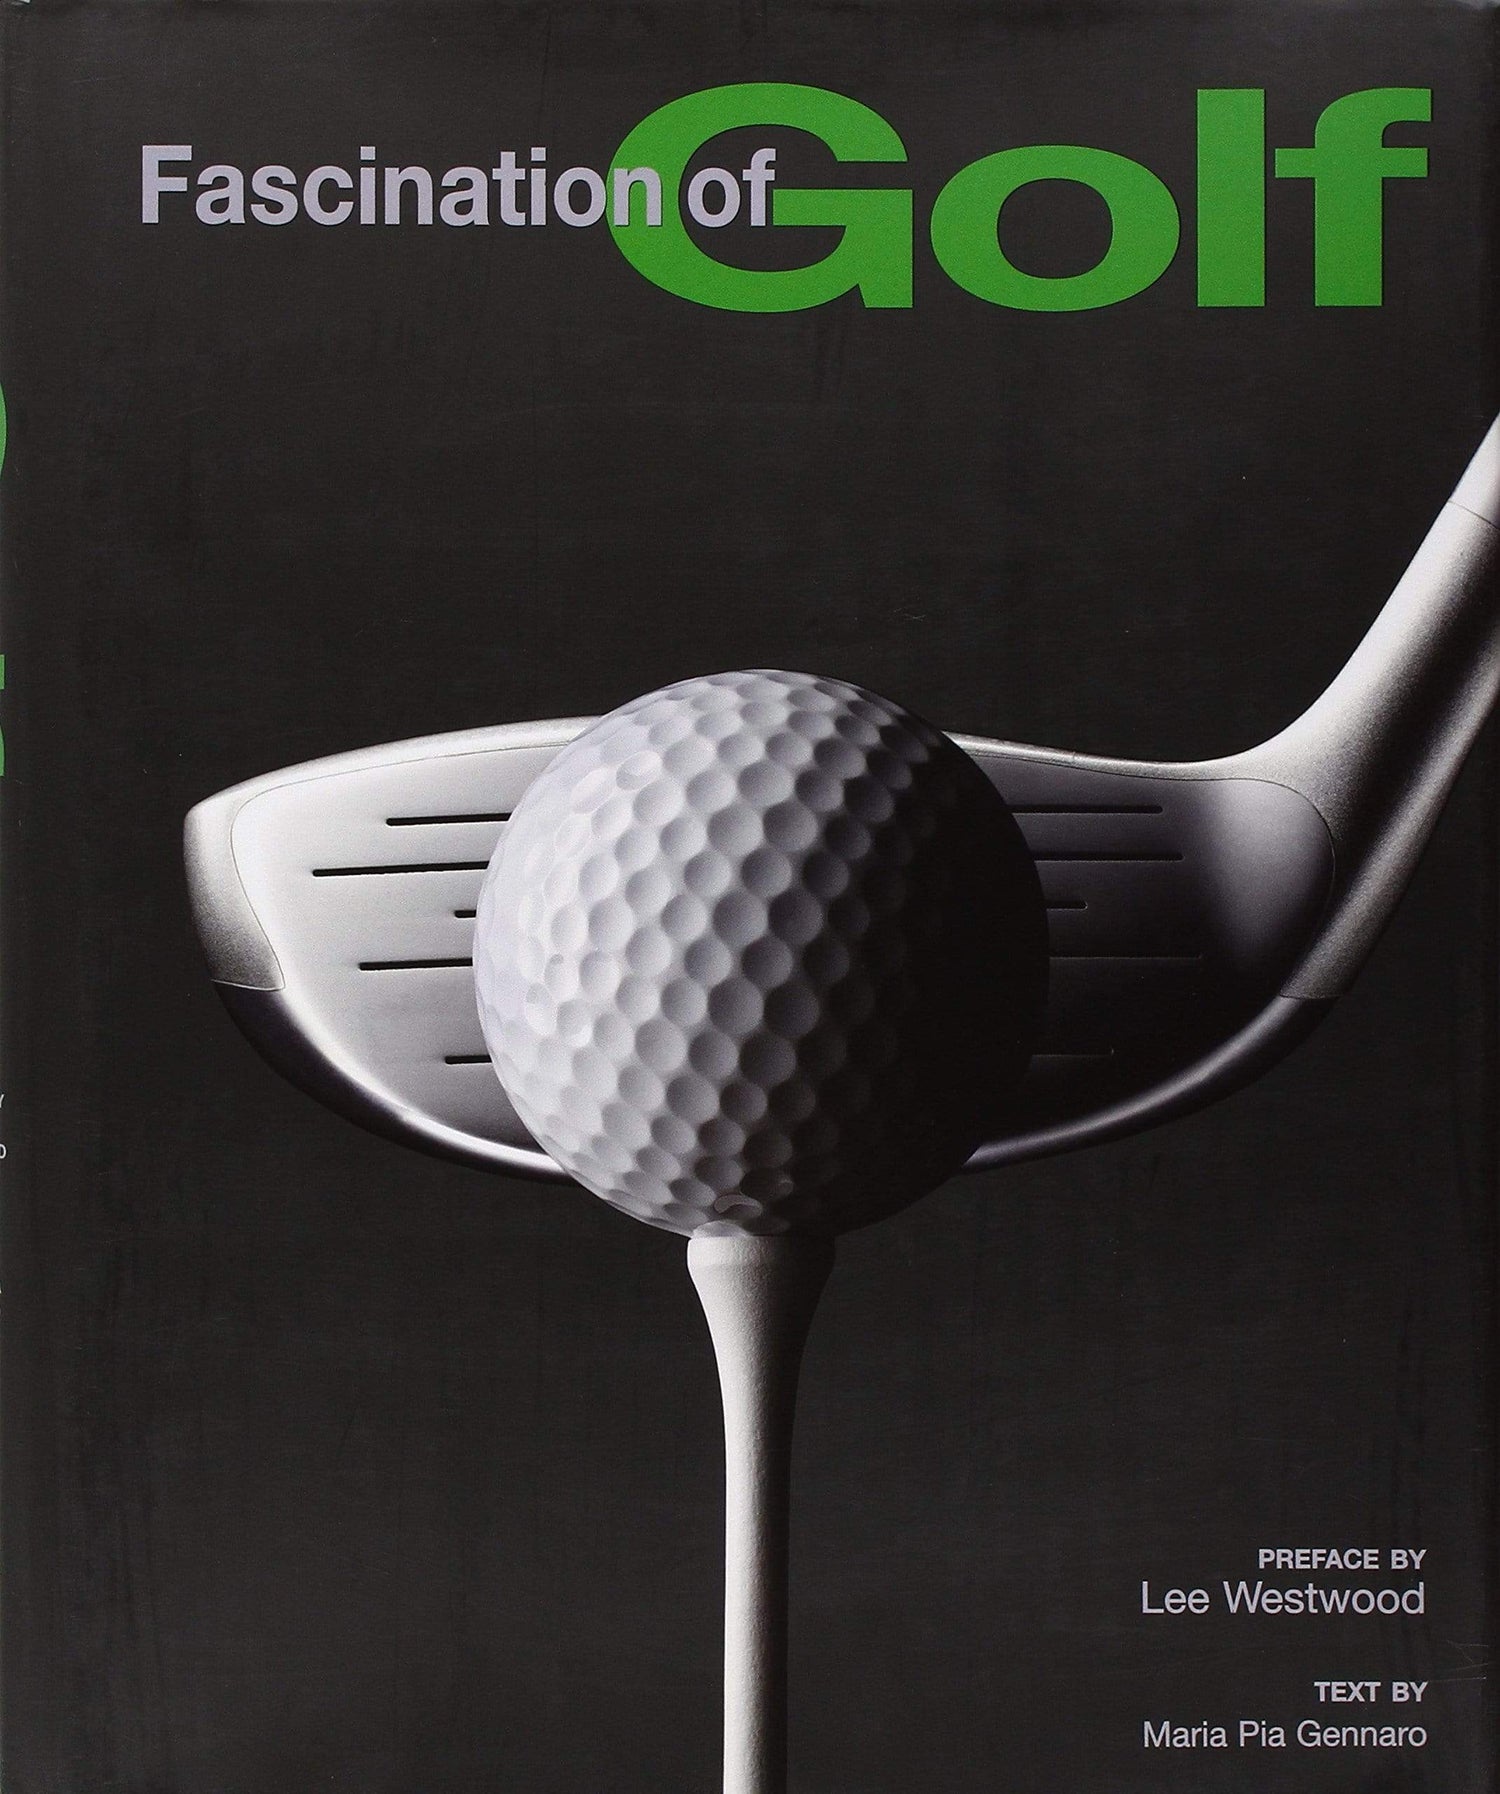 FASCINATION OF GOLF